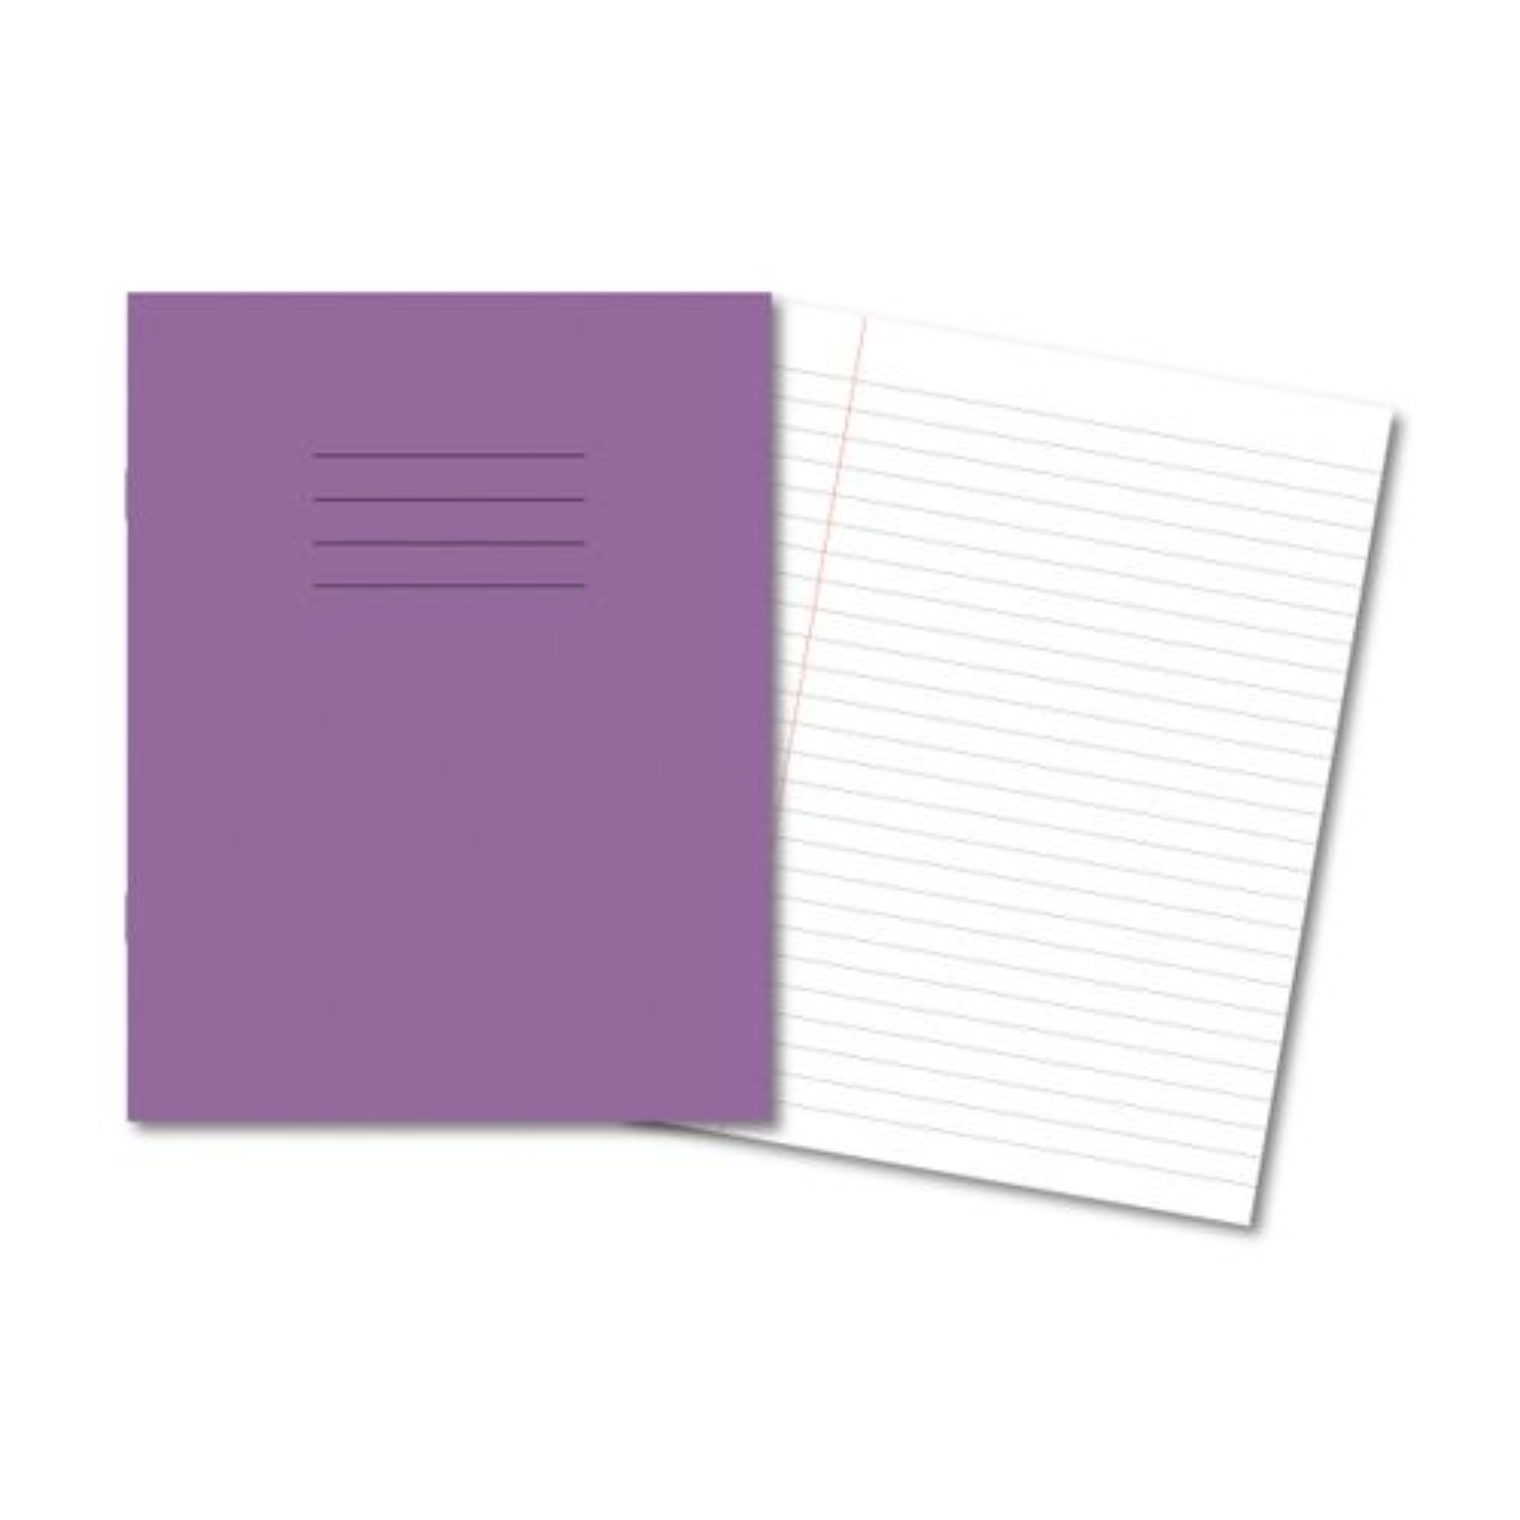 Exercise-Book-A4-8mm-Ruled-and-Margin-Purple